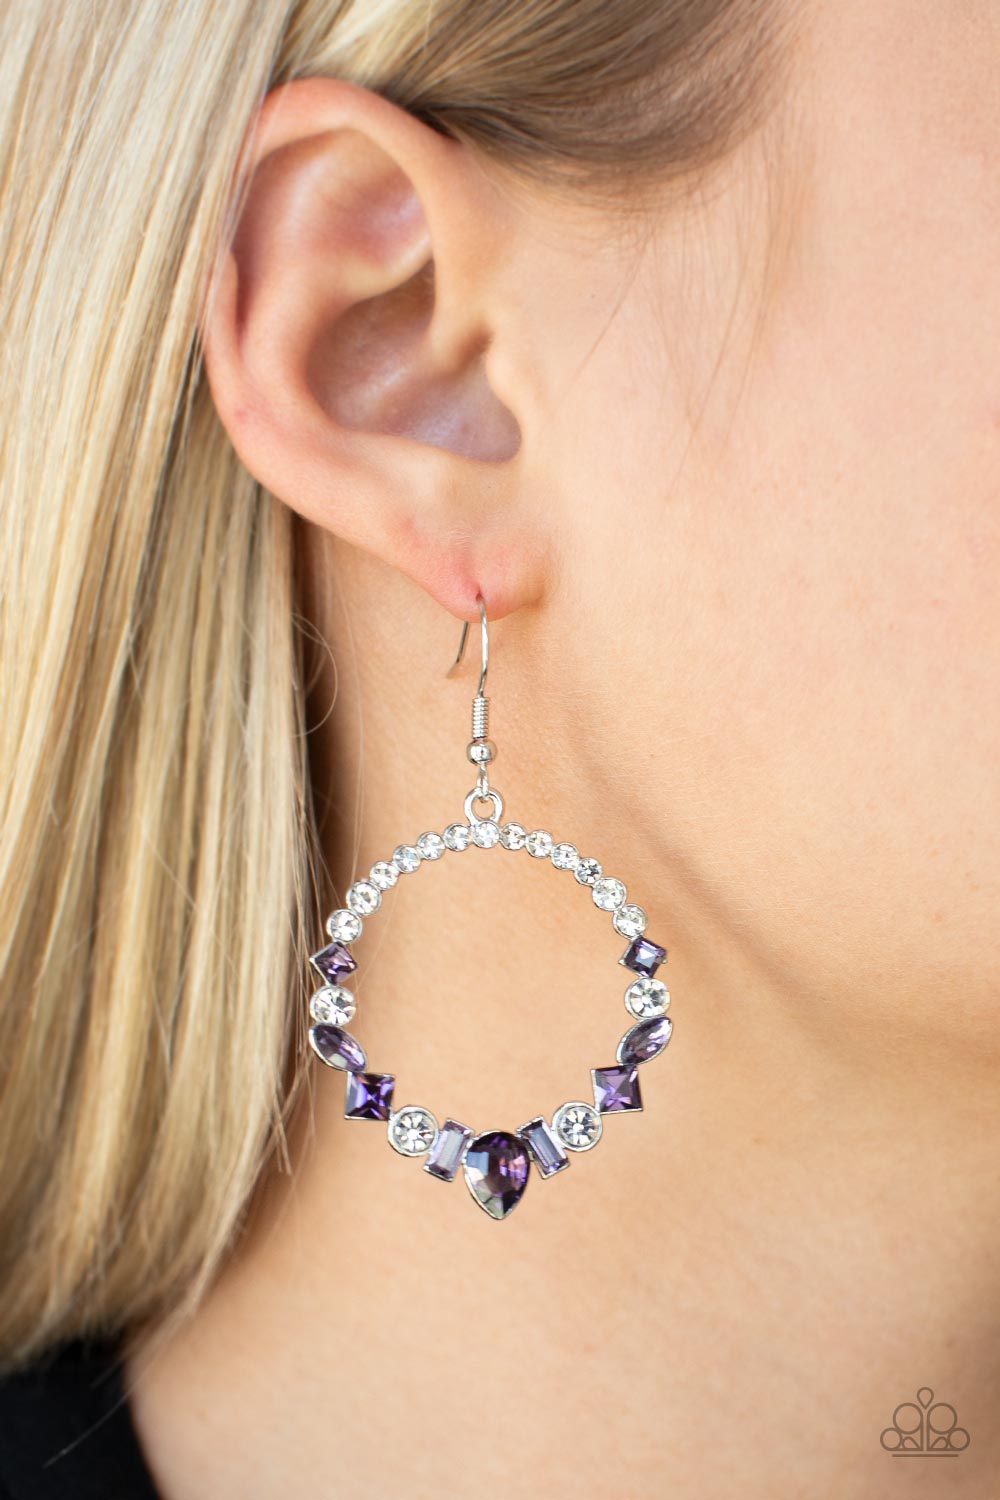 Revolutionary Refinement Purple Earrings - Paparazzi Accessories-on model - CarasShop.com - $5 Jewelry by Cara Jewels